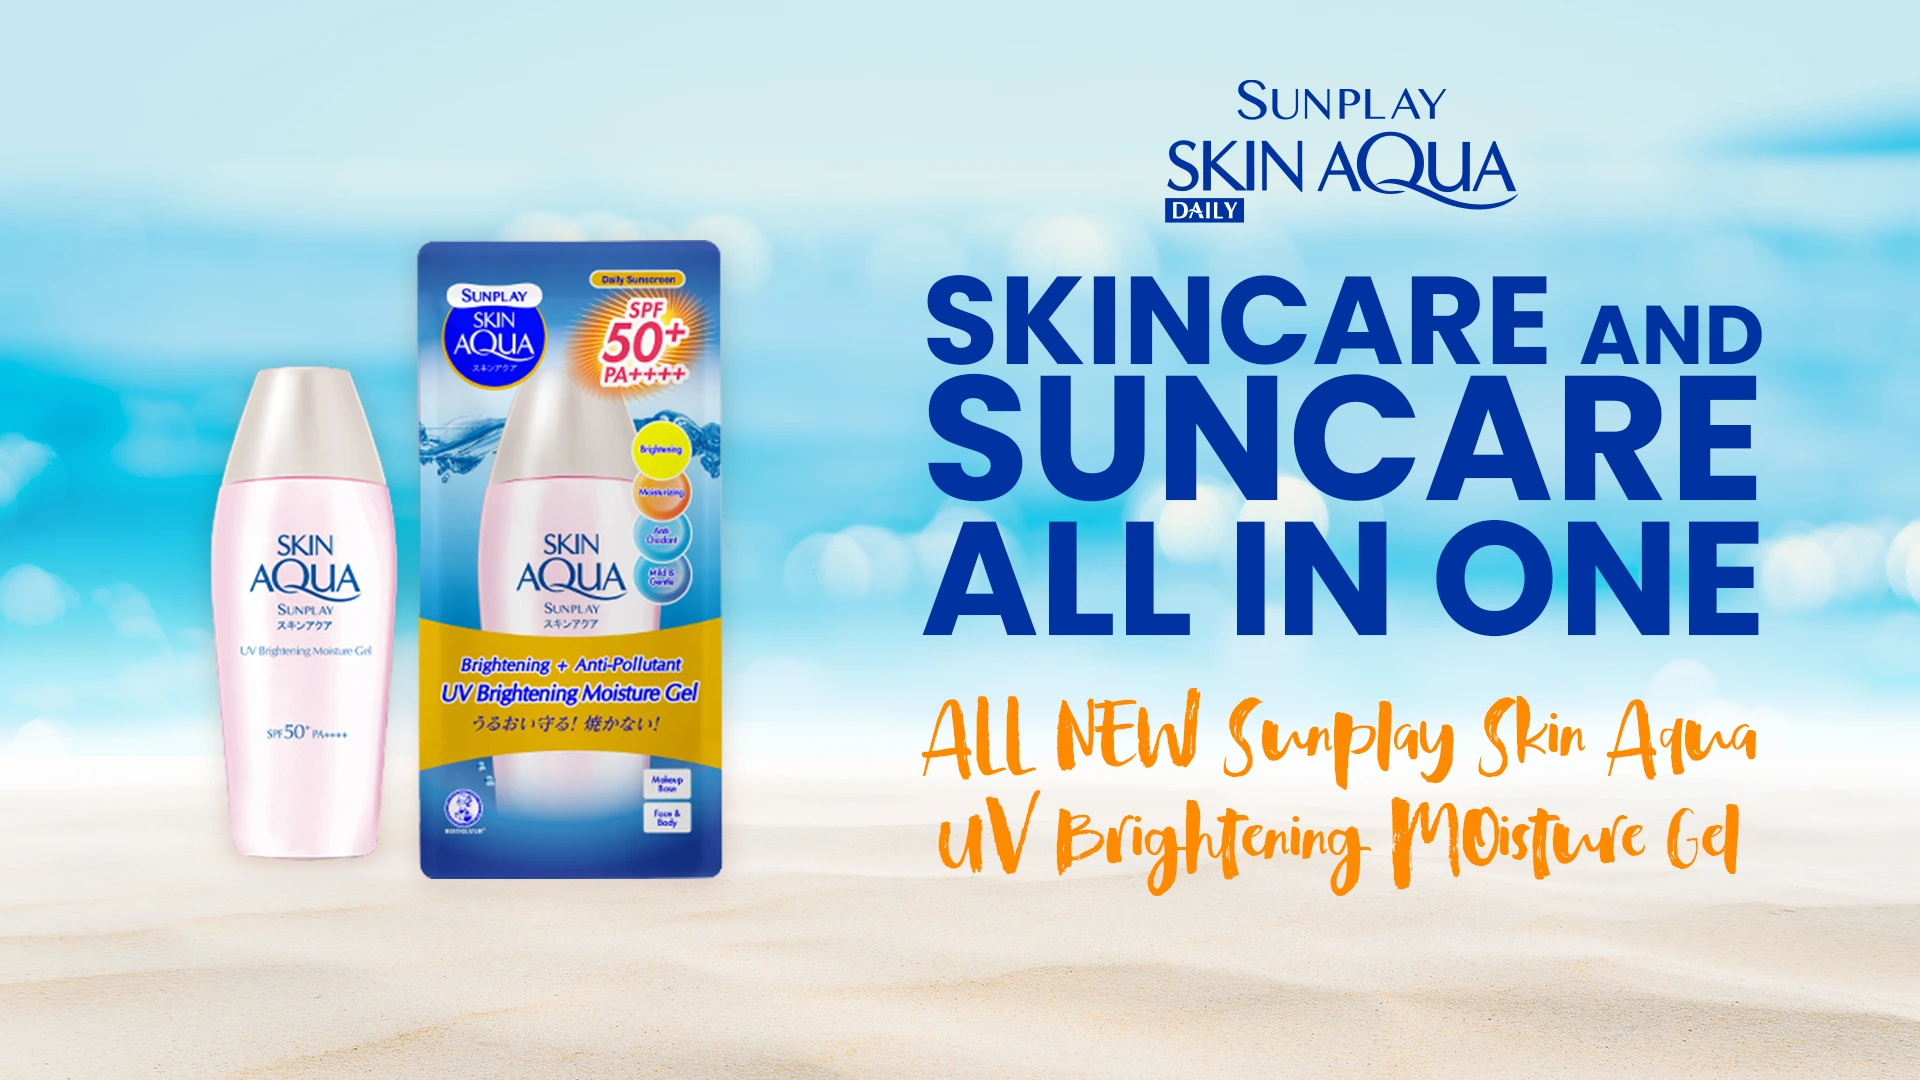 Discover Sunplay: Skincare and suncare all in one